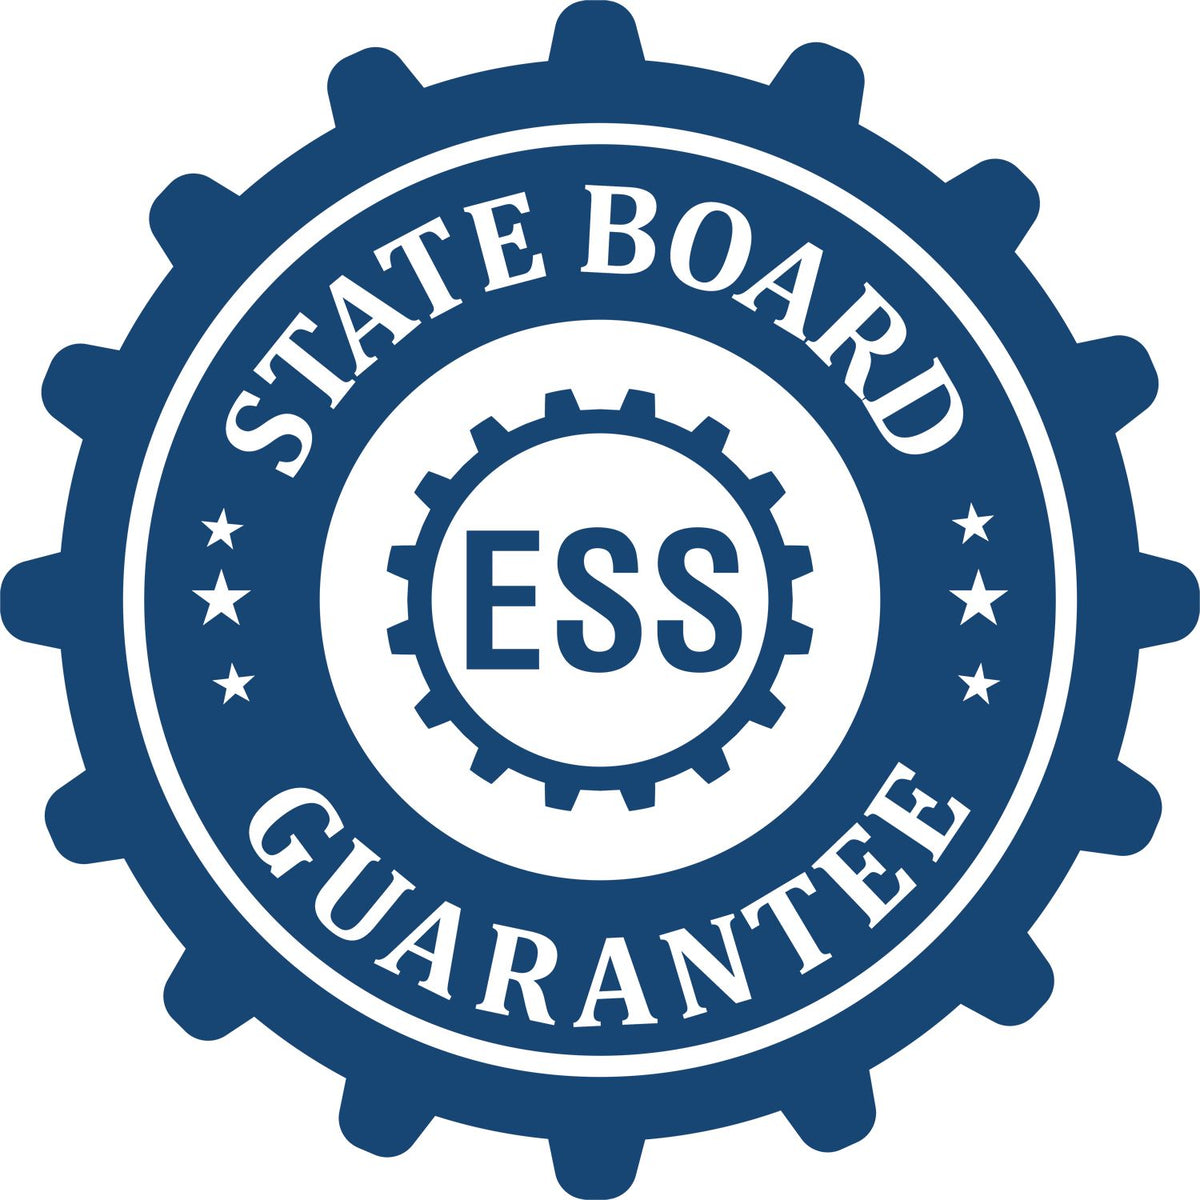 An emblem in a gear shape illustrating a state board guarantee for the Hawaii Engineer Desk Seal product.